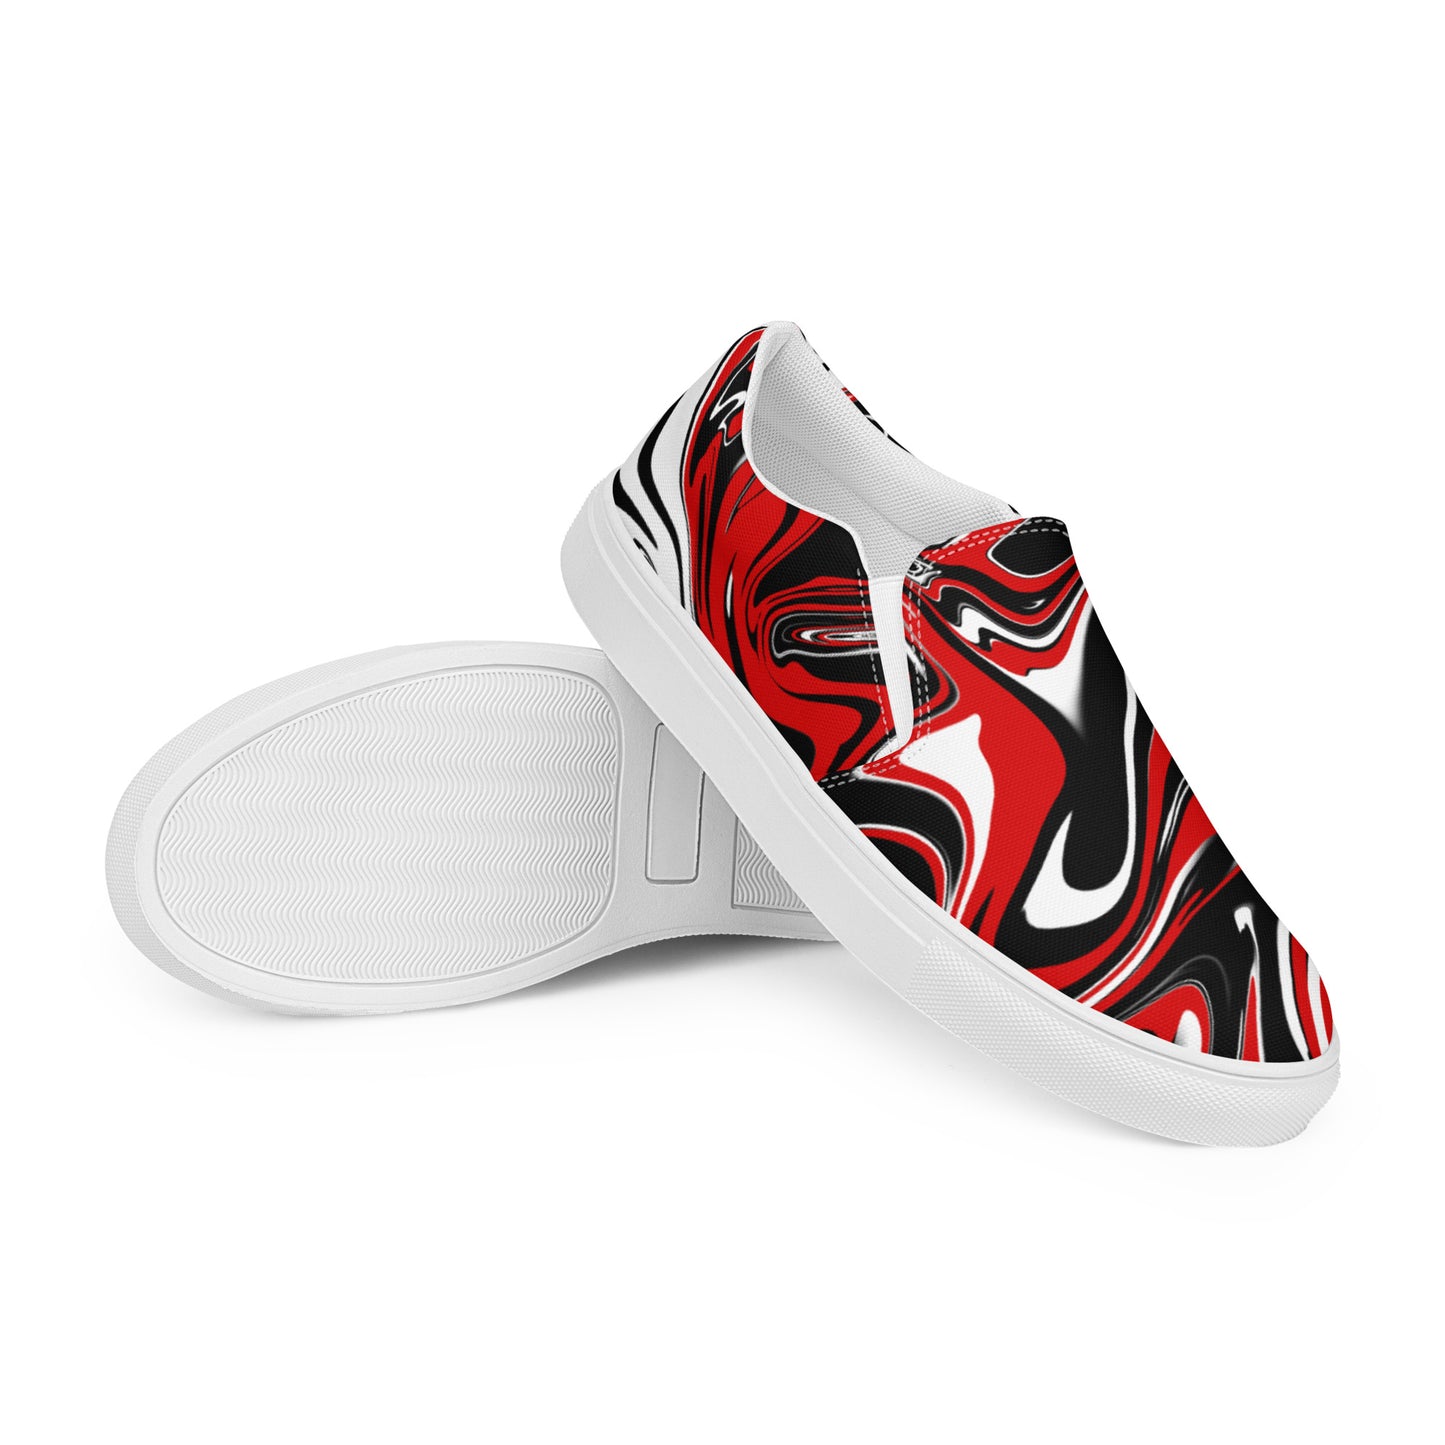 Women’s slip-on canvas shoes Marble Pattern